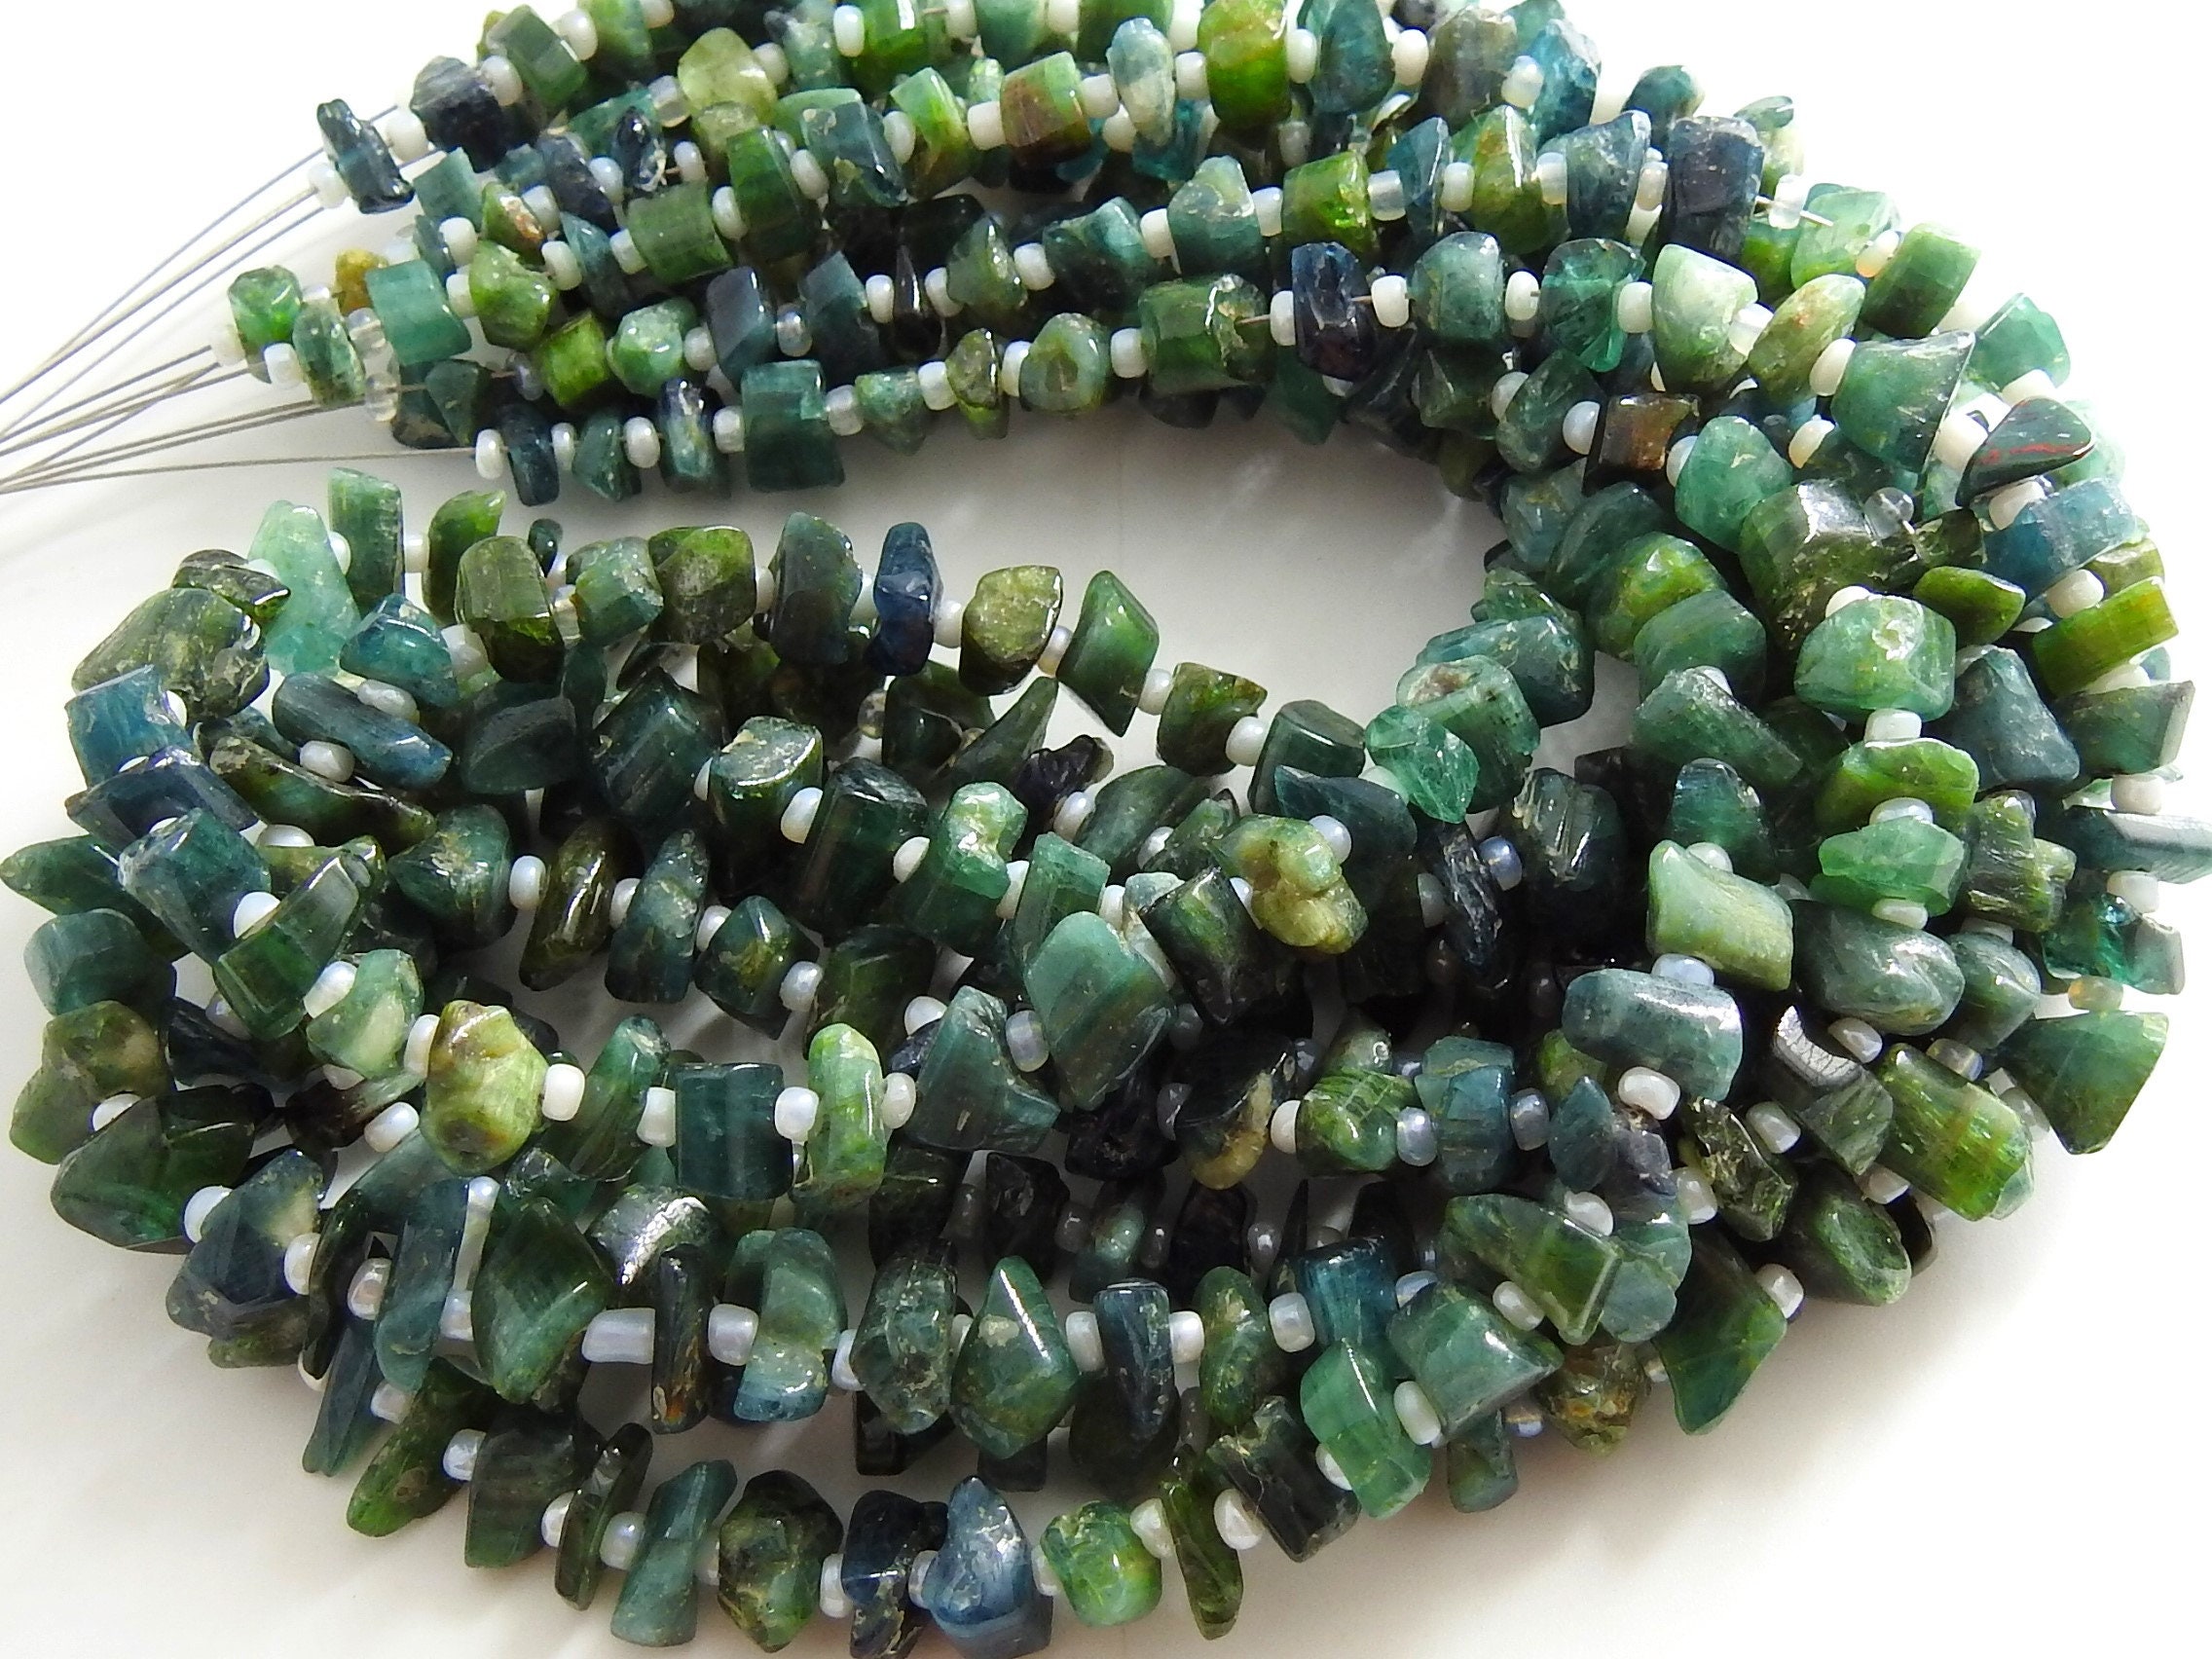 Green Tourmaline Rough Bead,Anklets,Uncut,Chip,Nuggets,Raw,Polished,Loose Stone,For Making Jewelry 16Inch 9X4To5X5MM Approx 100%Natural RB2 | Save 33% - Rajasthan Living 16